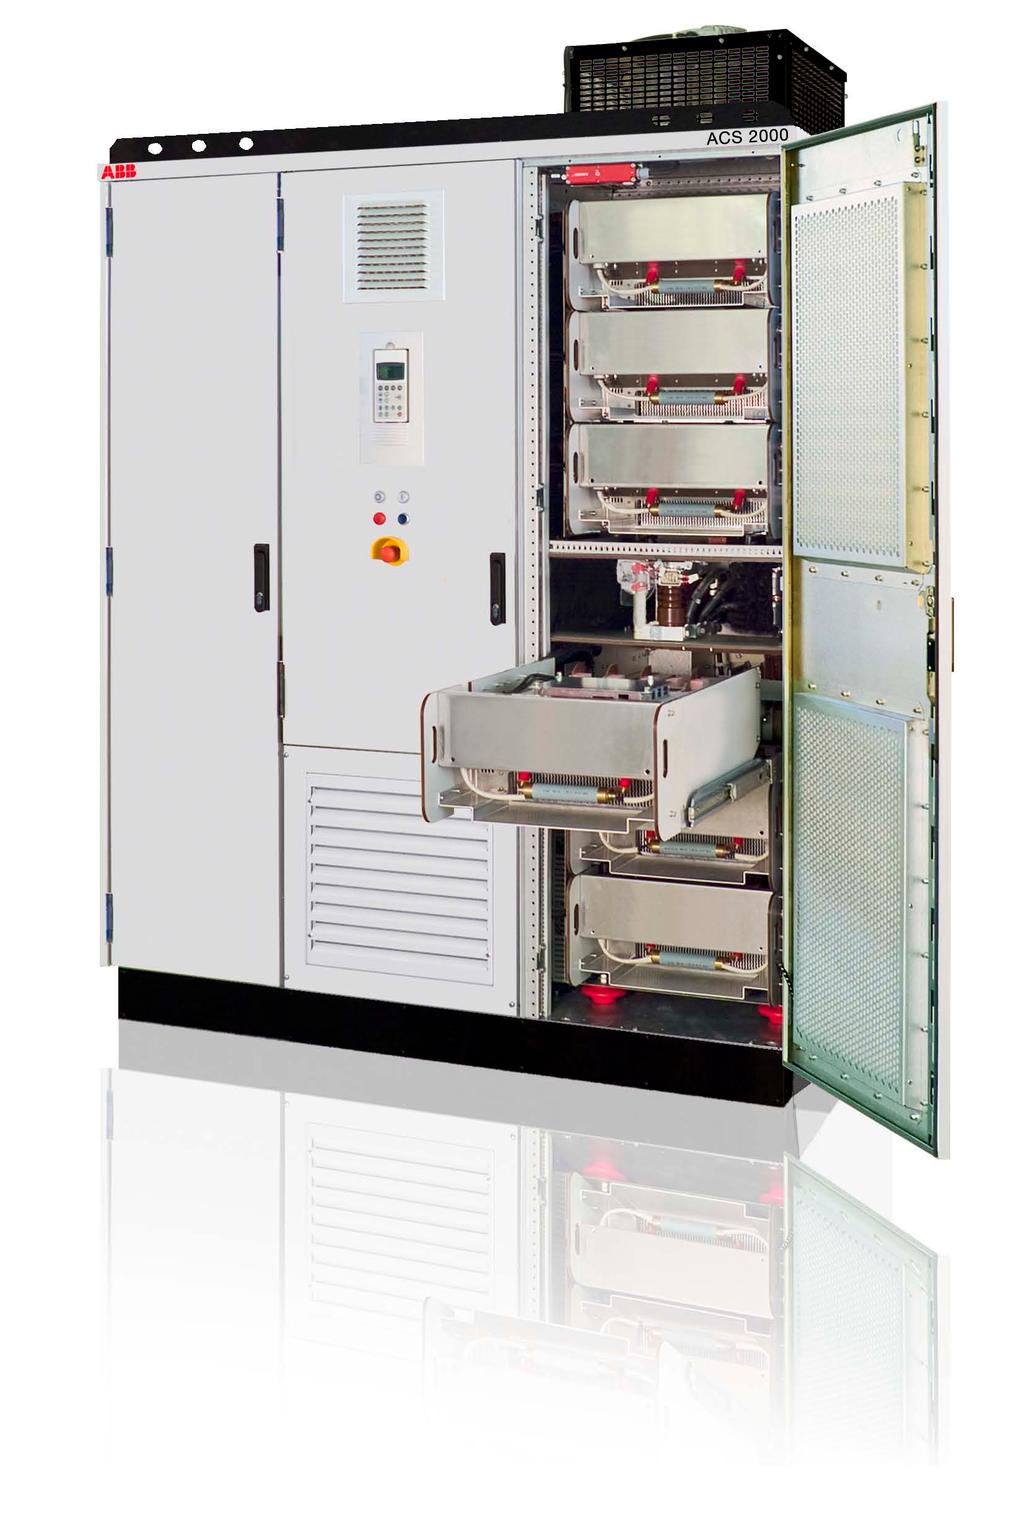 It is designed for easy installation, fast commissioning and efficient maintenance reducing the total cost of ownership.